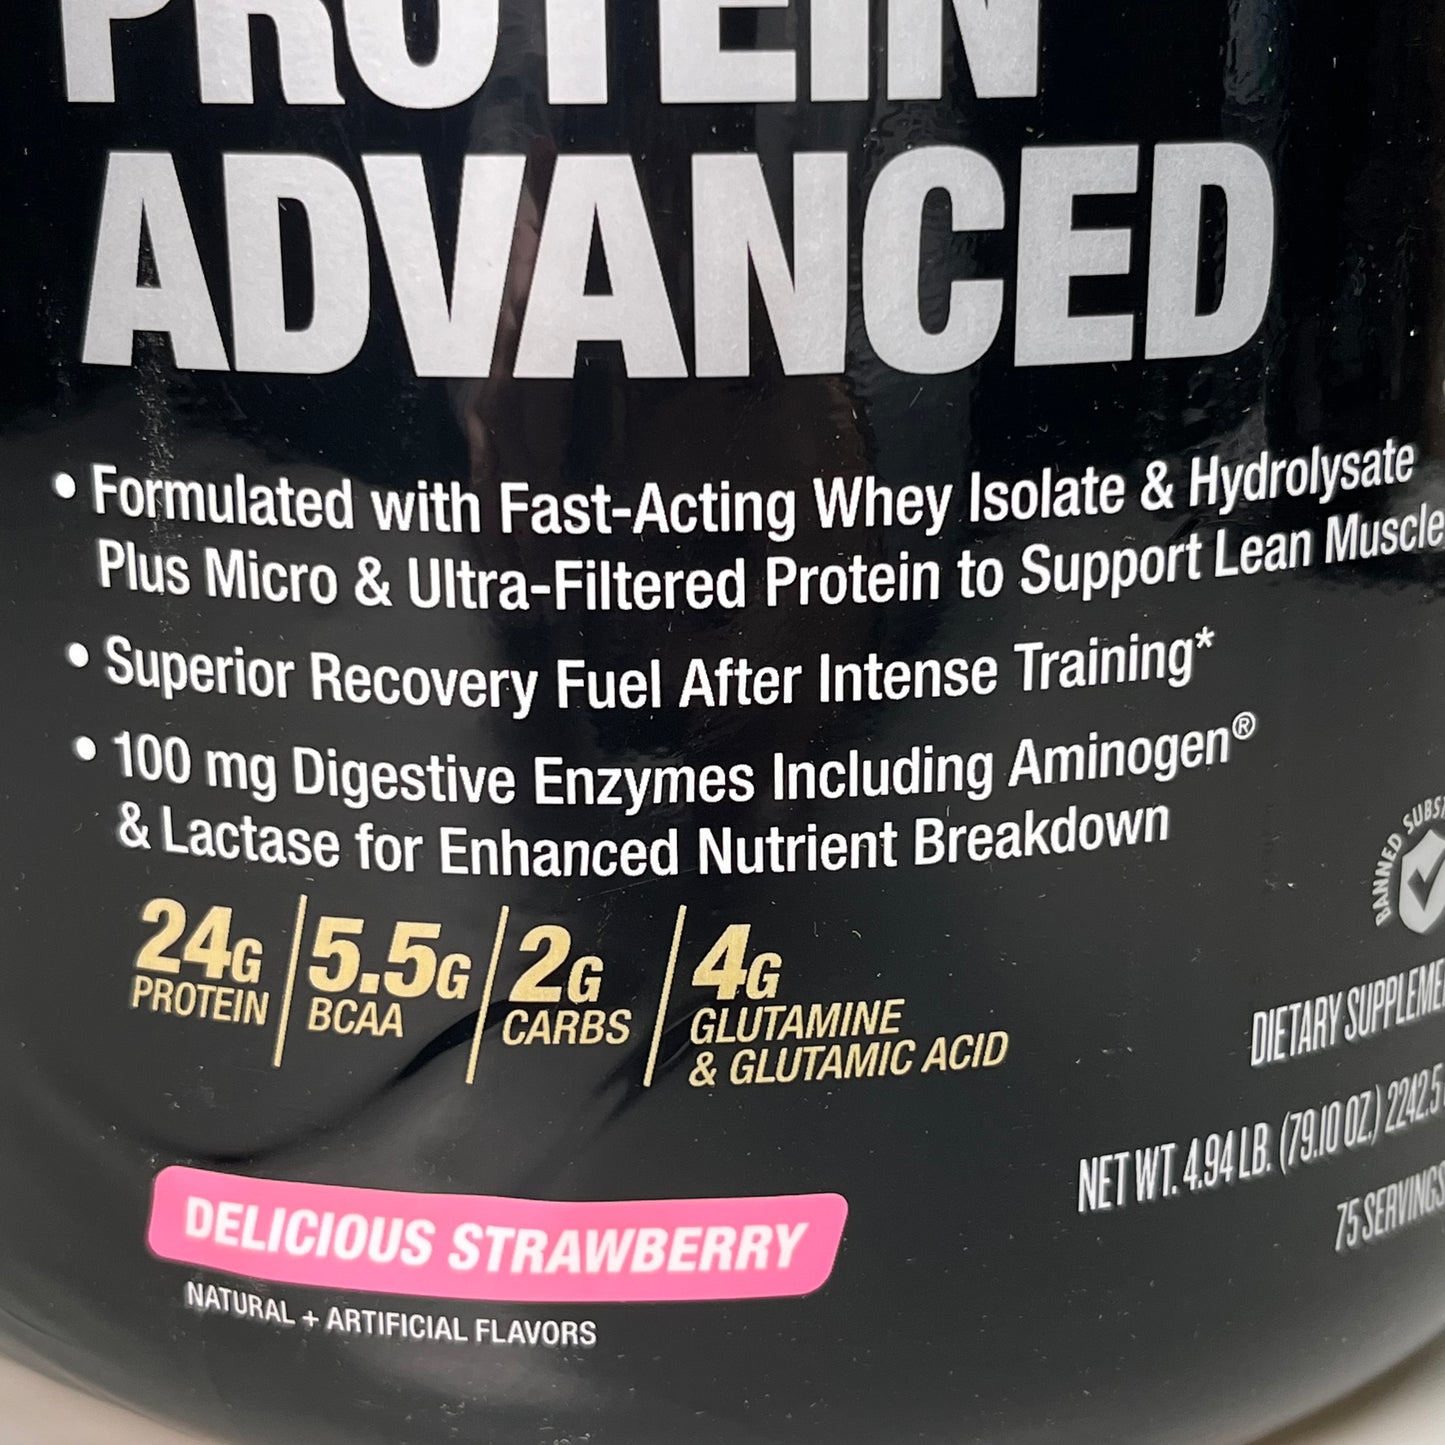 GNC Pro Performance Gold Series 100% Whey Protein Delicious Strawberry 79.10 oz. 2242.5g (New)